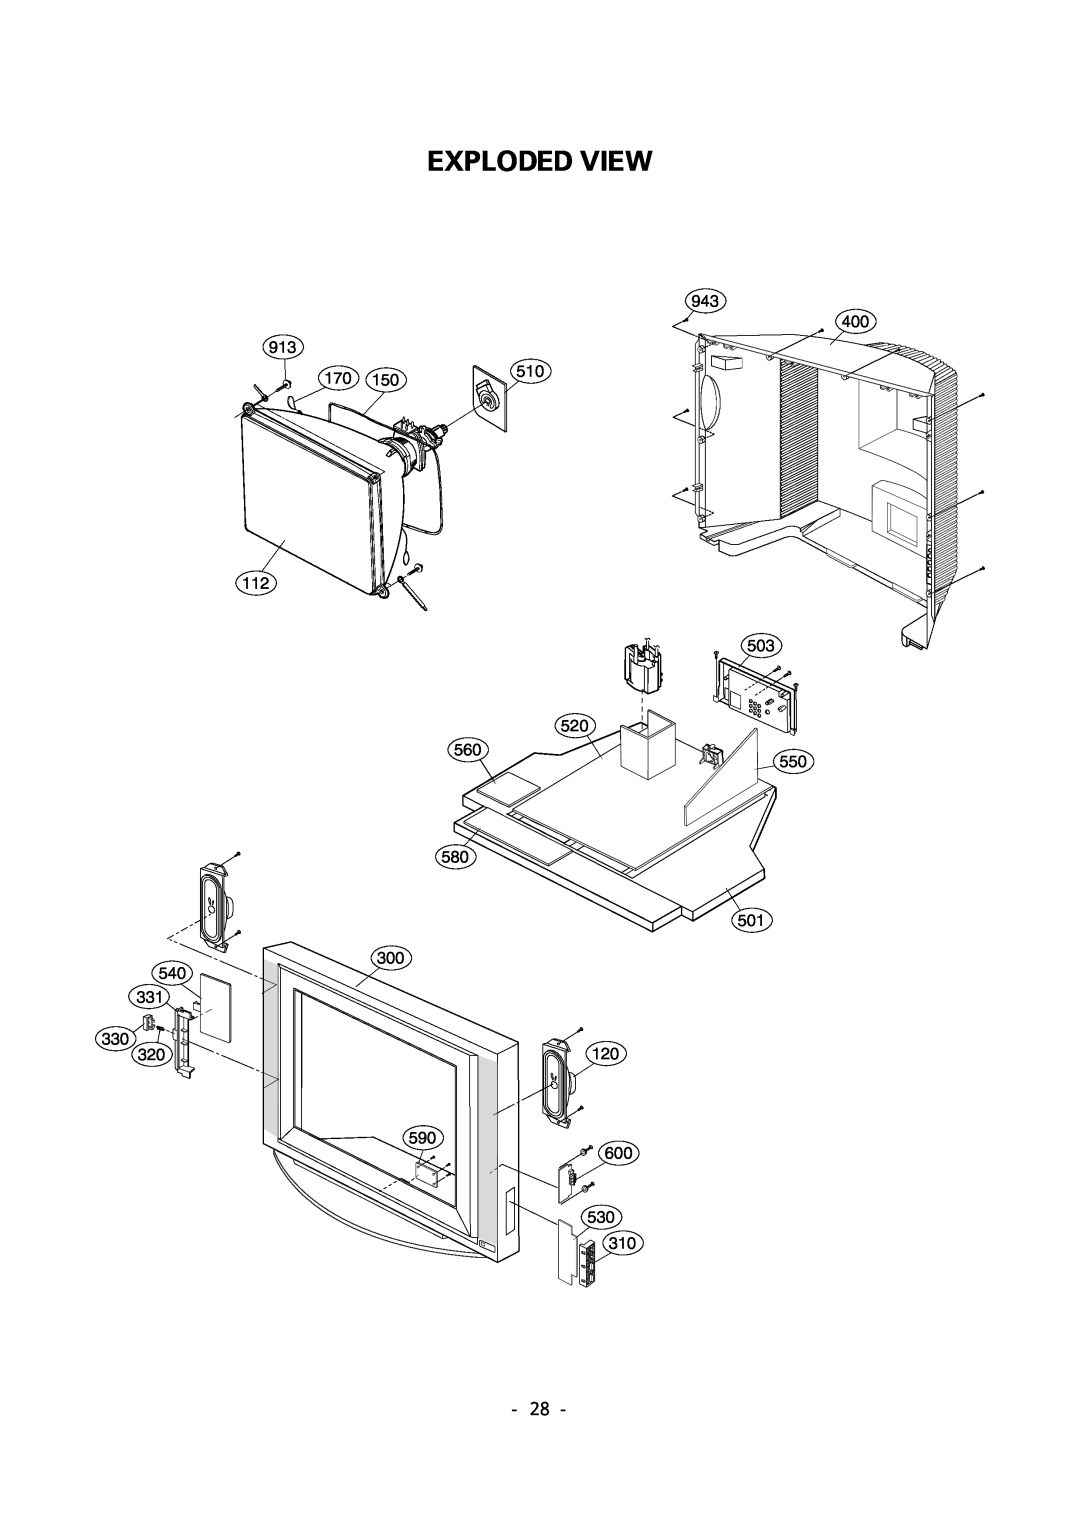 LG Electronics 29FS2AMB/ANX-ZE Exploded View, 943 400 913, 112 503 520, 560 580, 540 331, 501 300 120 590 600 530 310 